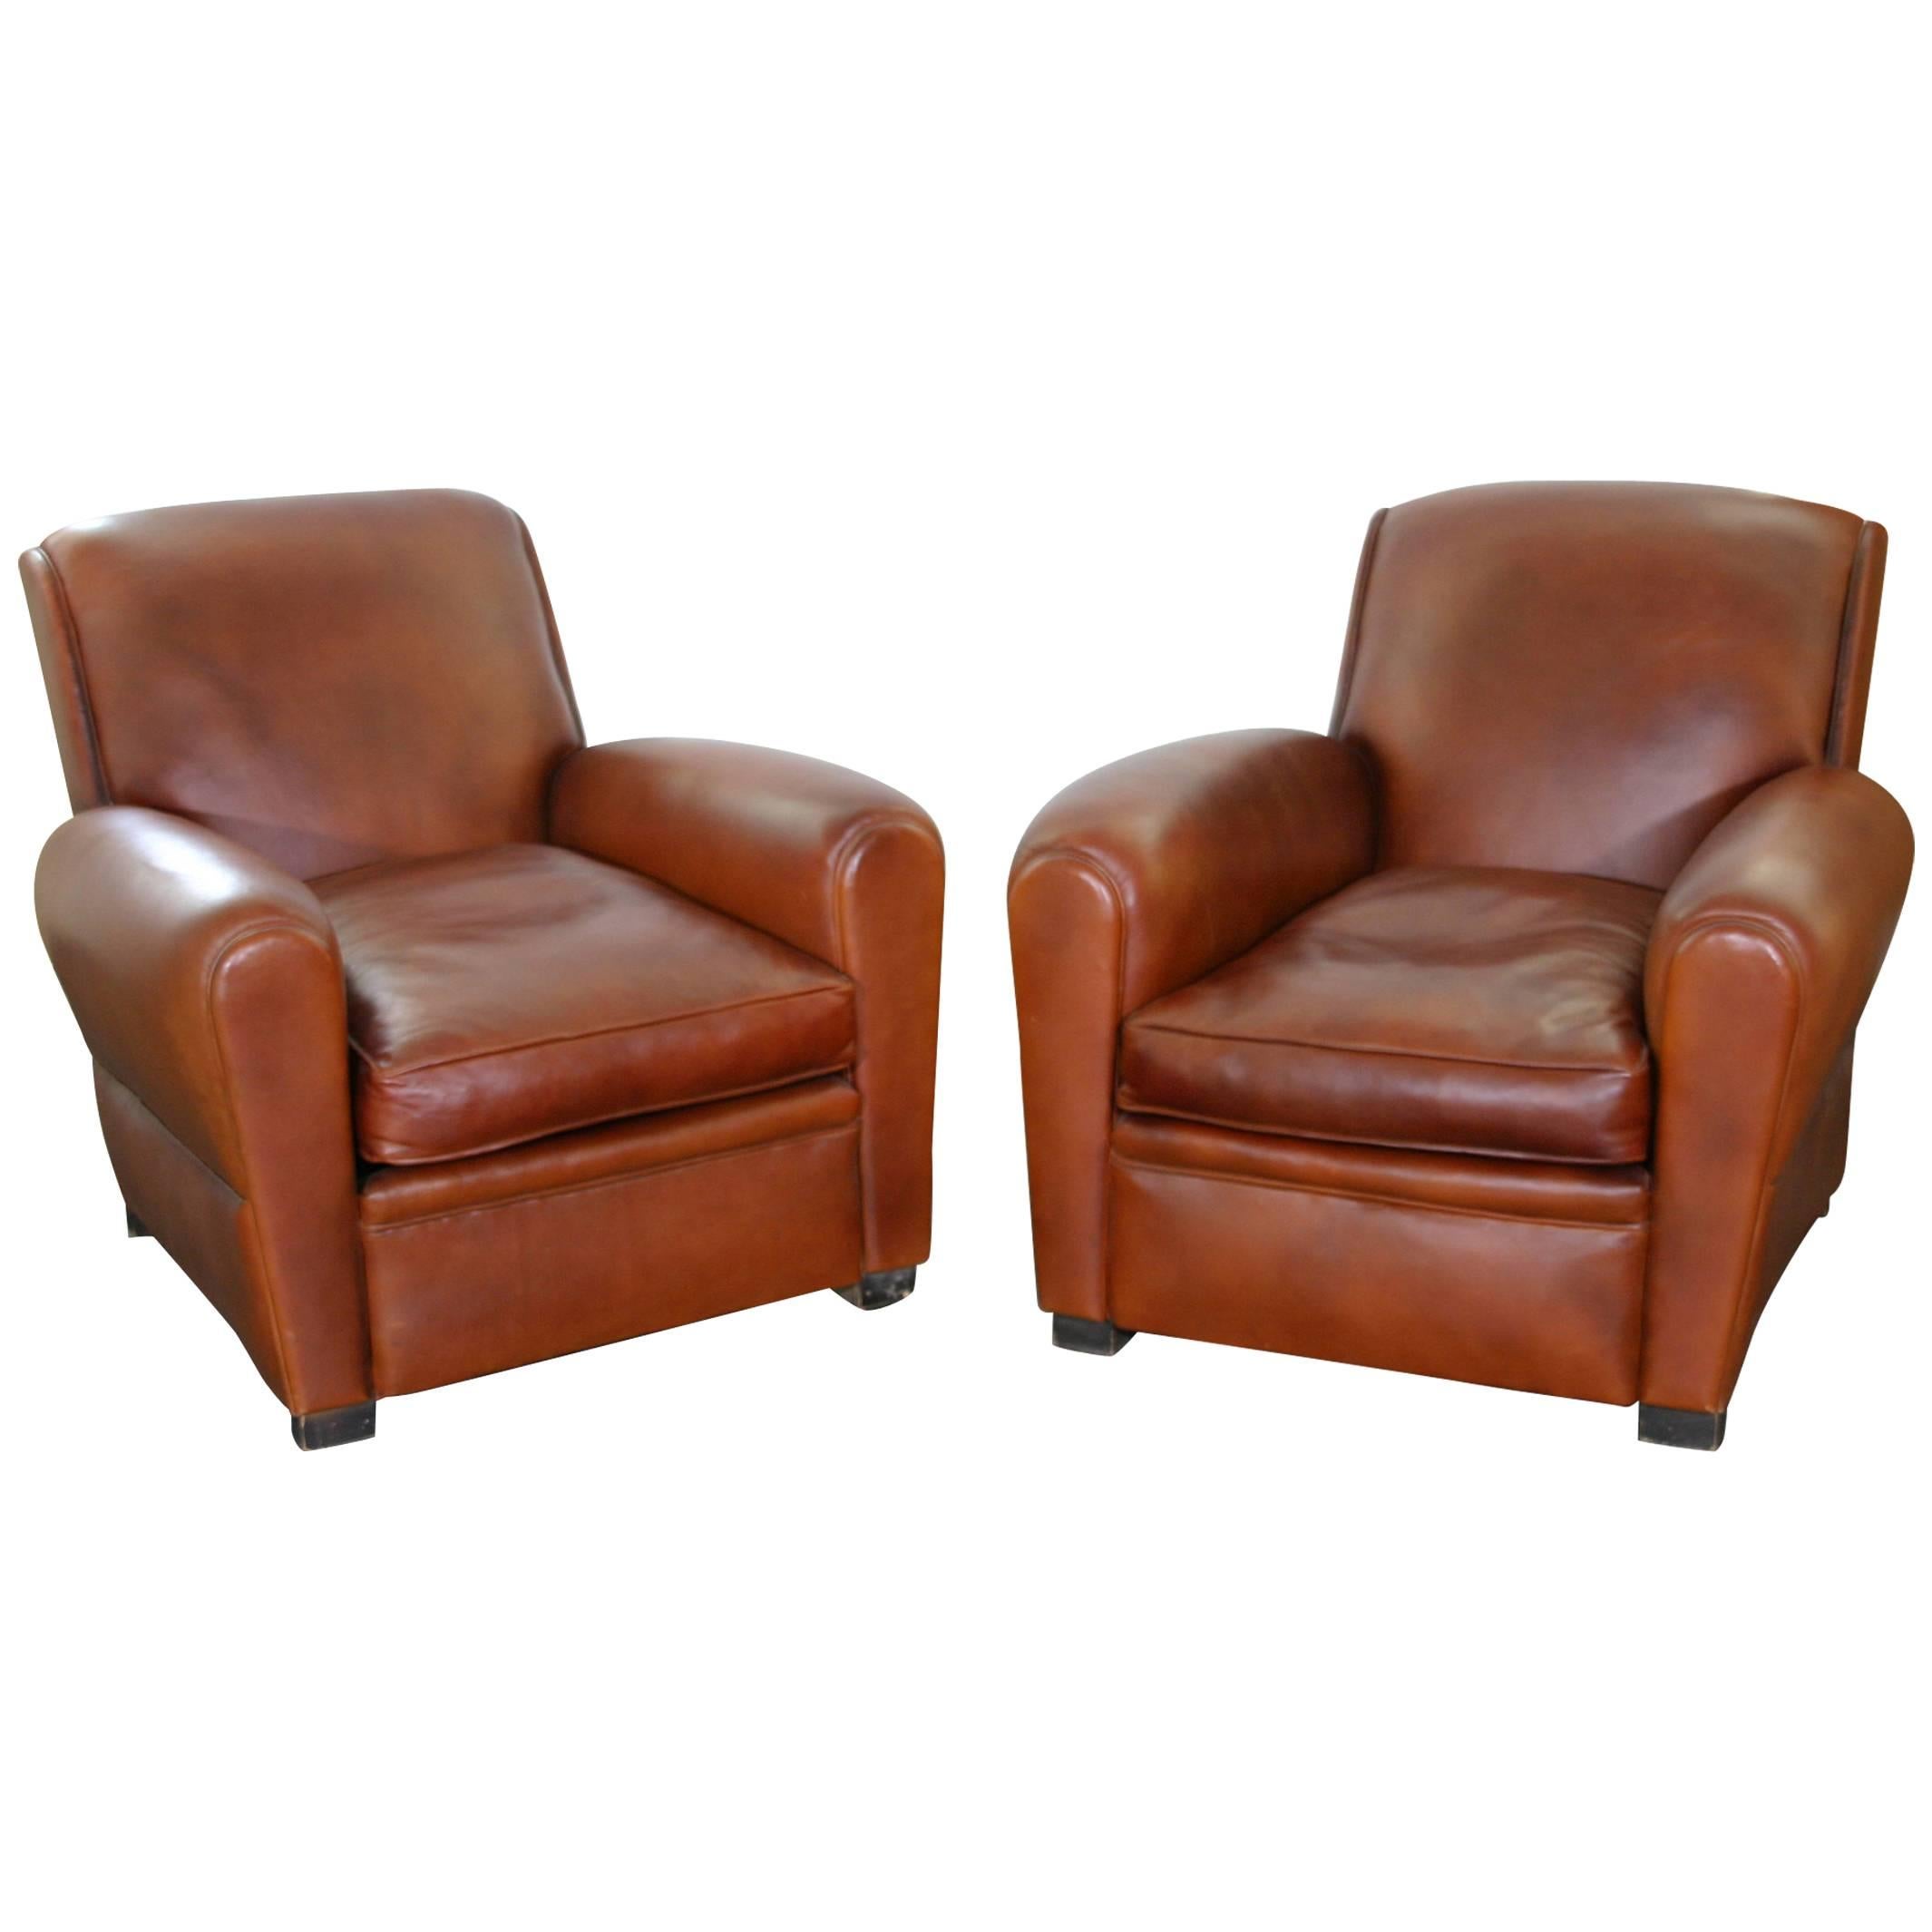 Pair of Leather Club Chairs For Sale